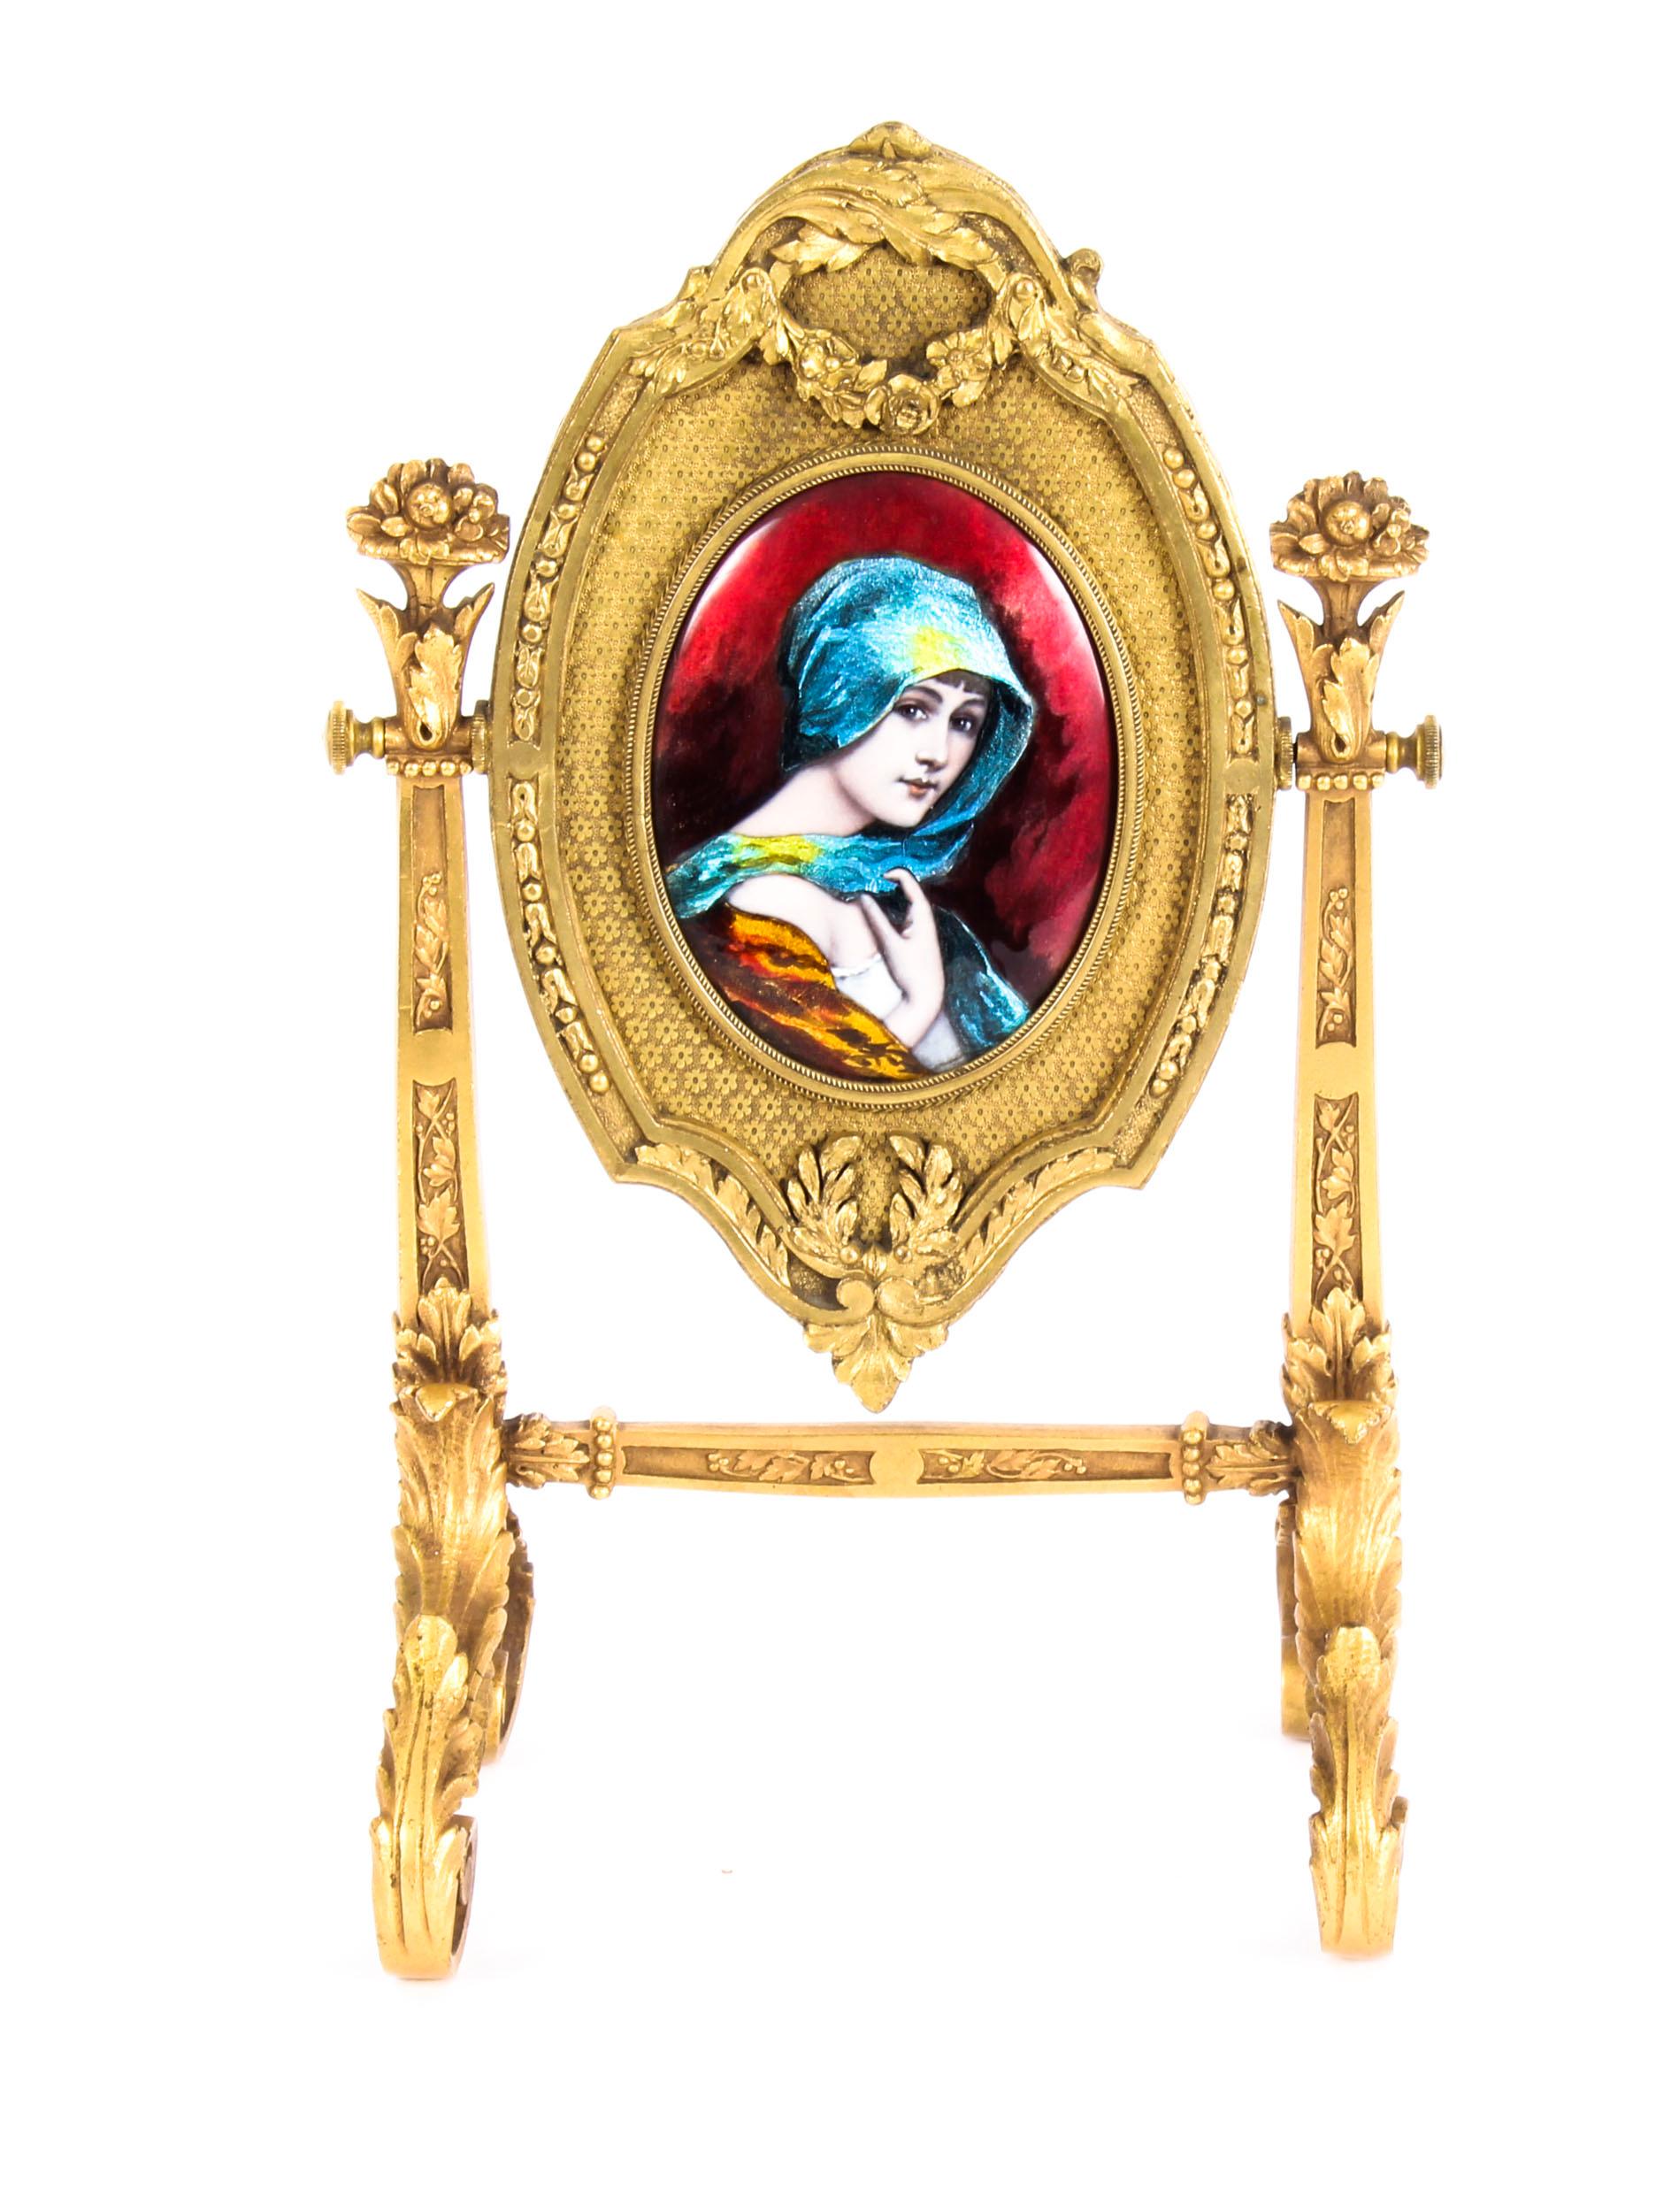 This is an impressive and highly decorative French gilt bronze and Limoges enamel table mirro, Signed, F.Bienvue, Limoges and circa 1880 in date.

The enameled portrait roundel on a floral ground with swag and acanthus leaves, fitted with a bevelled